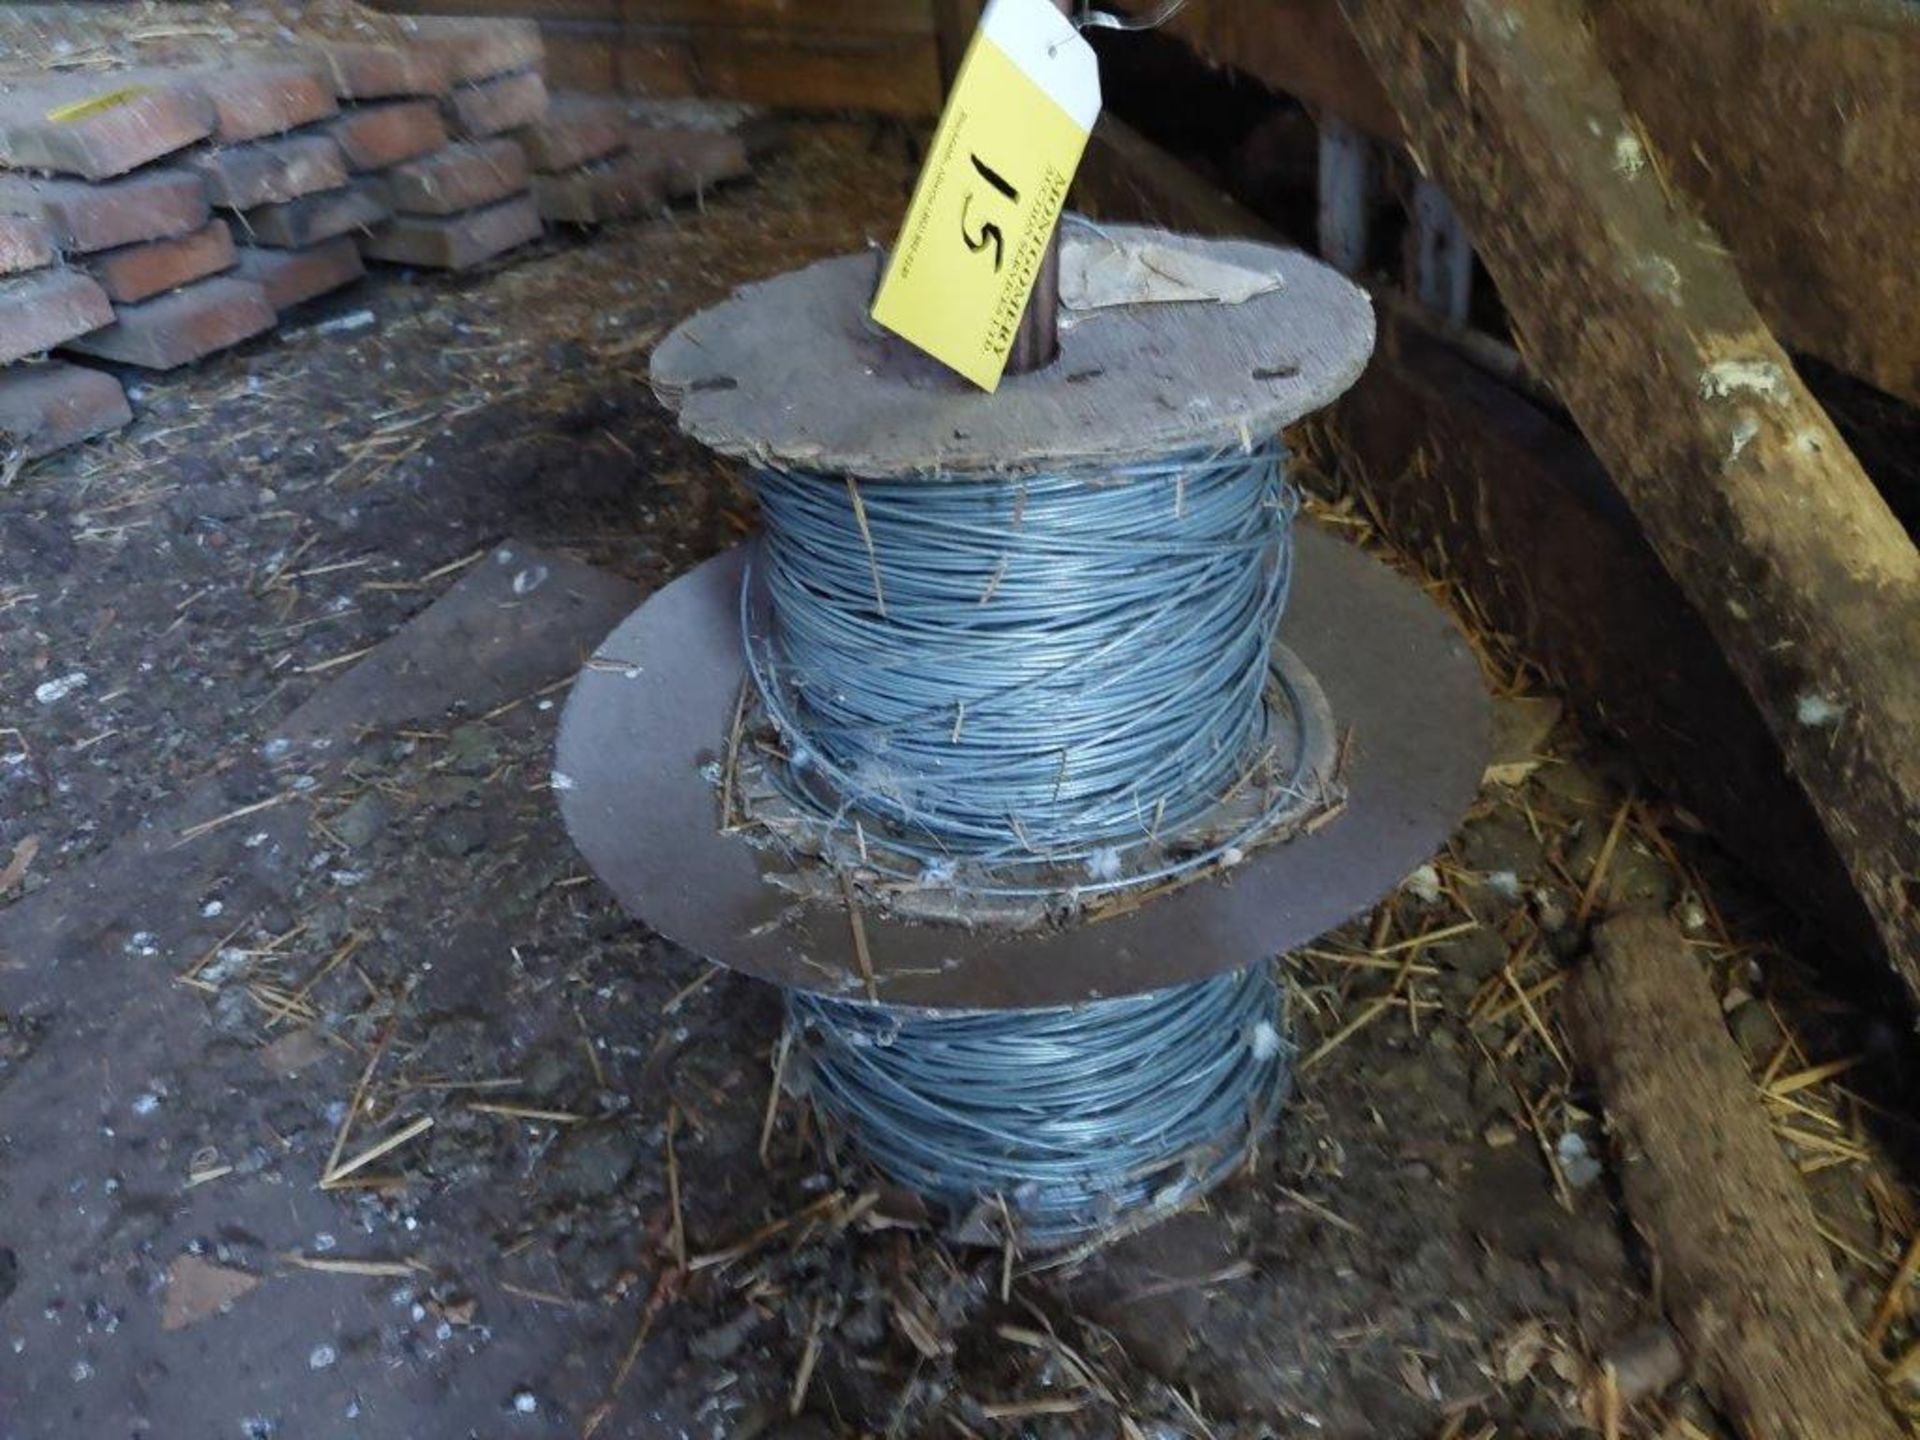 2-PART ROLLS OF HIGH TENSILE WIRE